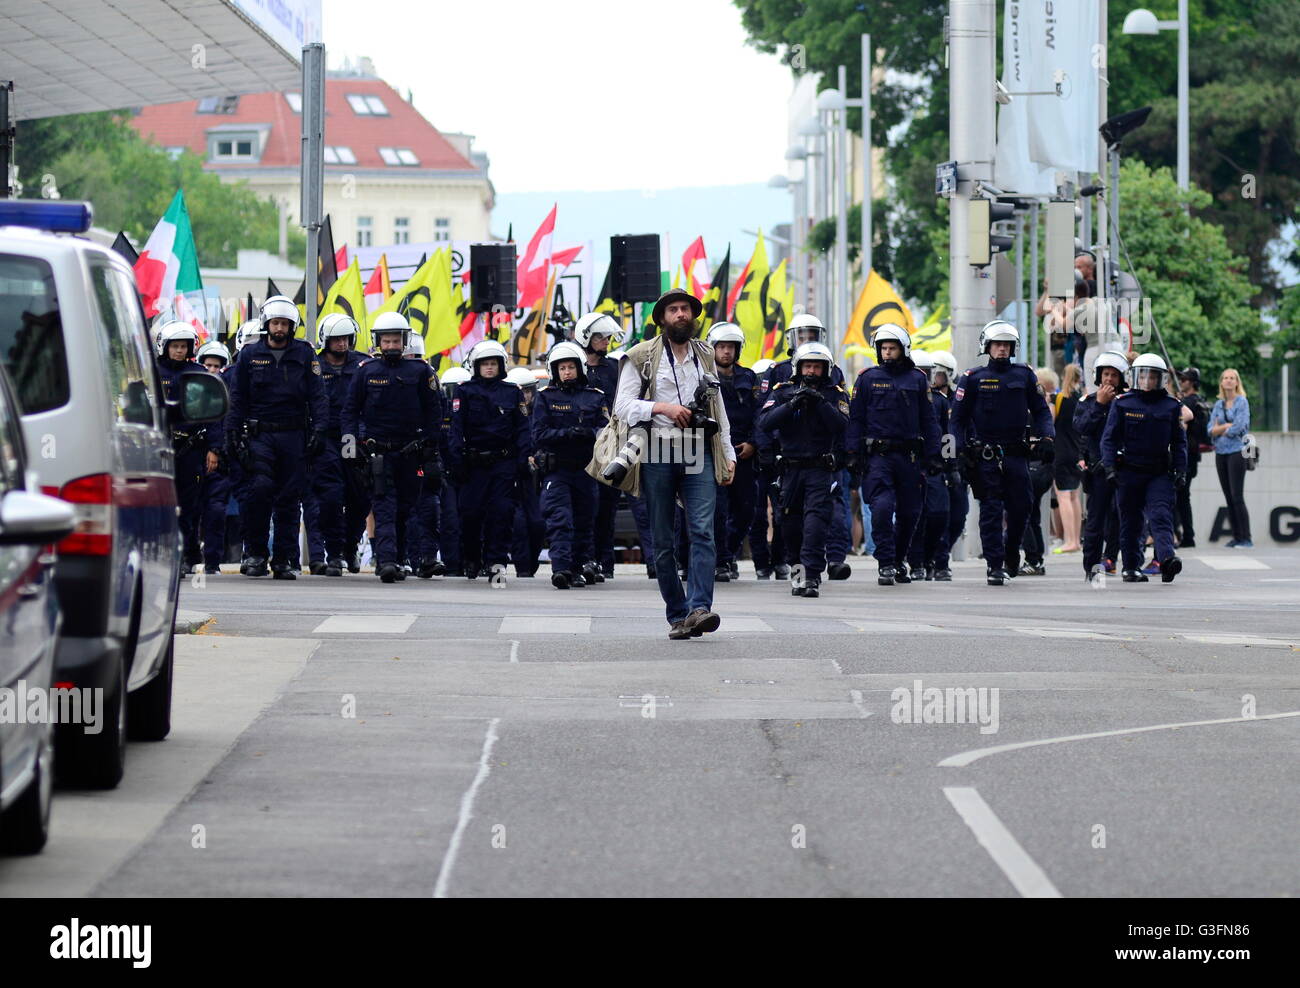 Vienna, Austria. 11th June, 2016. The demonstration of thethe identitarian was a massive police presence to accompany the demonstration in front of the left counter-demonstrators to protect. Activists of identitary have for 'a free and strong Europe of the future' demonstrated  in Vienna. Credit:  Franz Perc / Alamy Live News Stock Photo